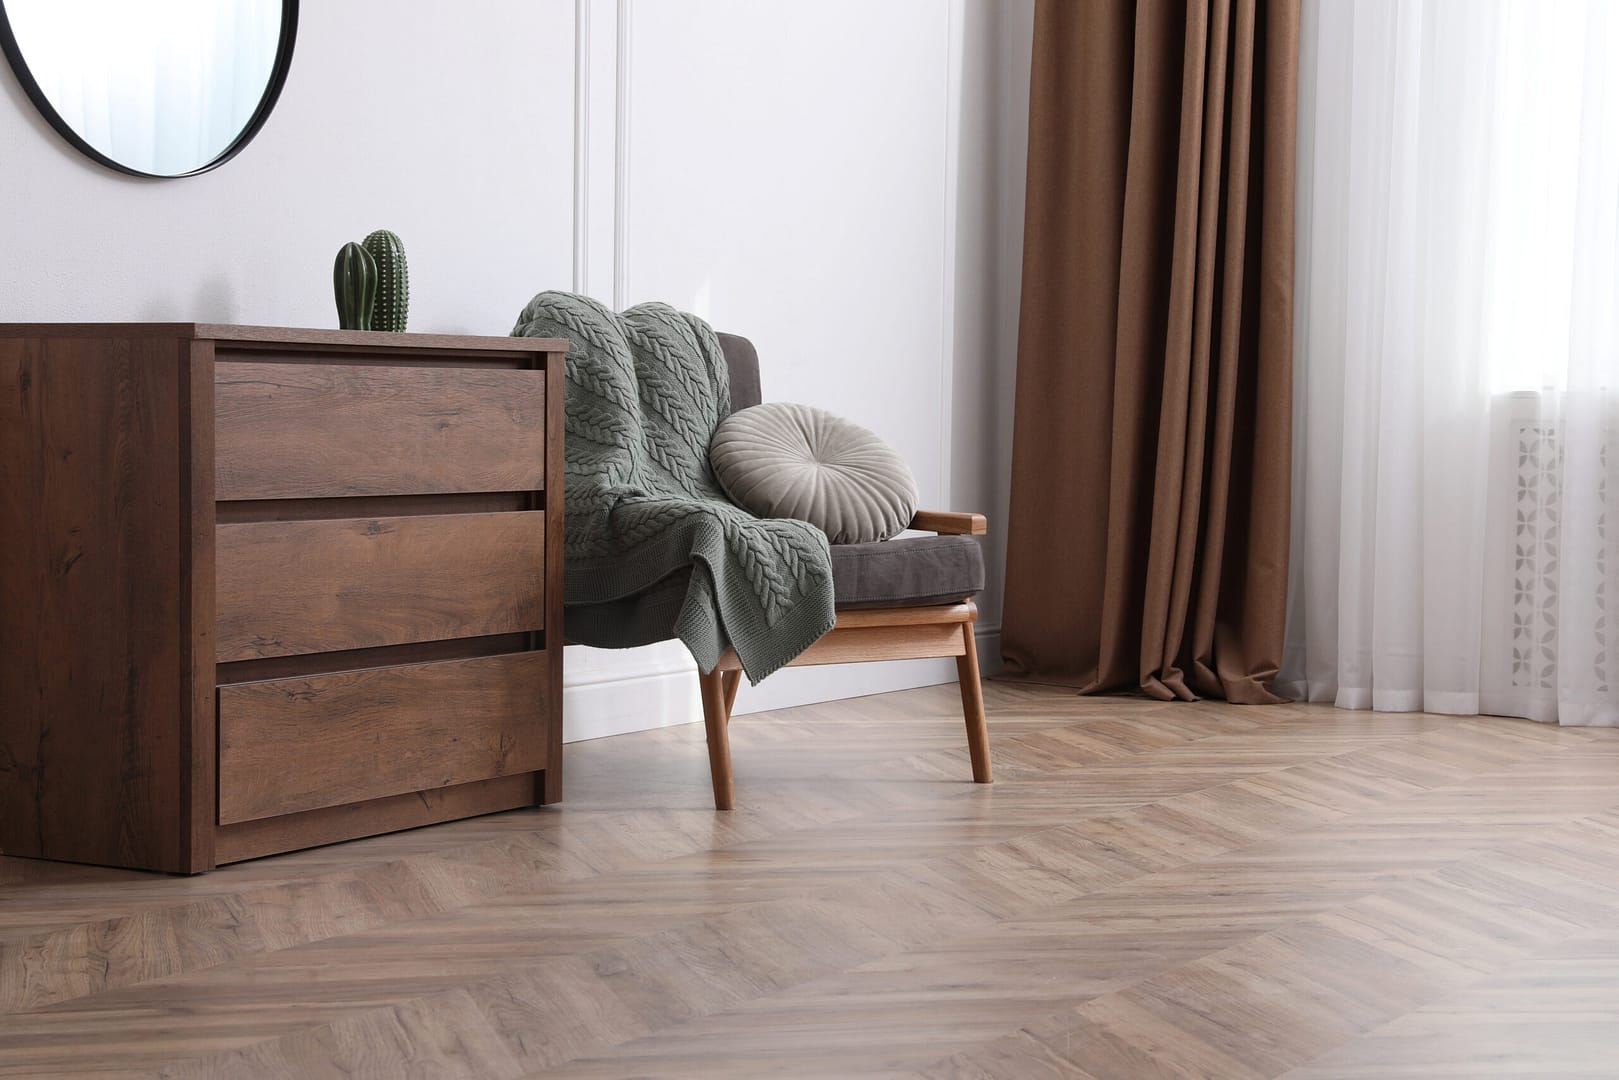 Contemporary living room adorned with parquet flooring and chic, modern furniture - Local Splash can help your flooring business showcase its commitment to quality through seamless flooring installation.